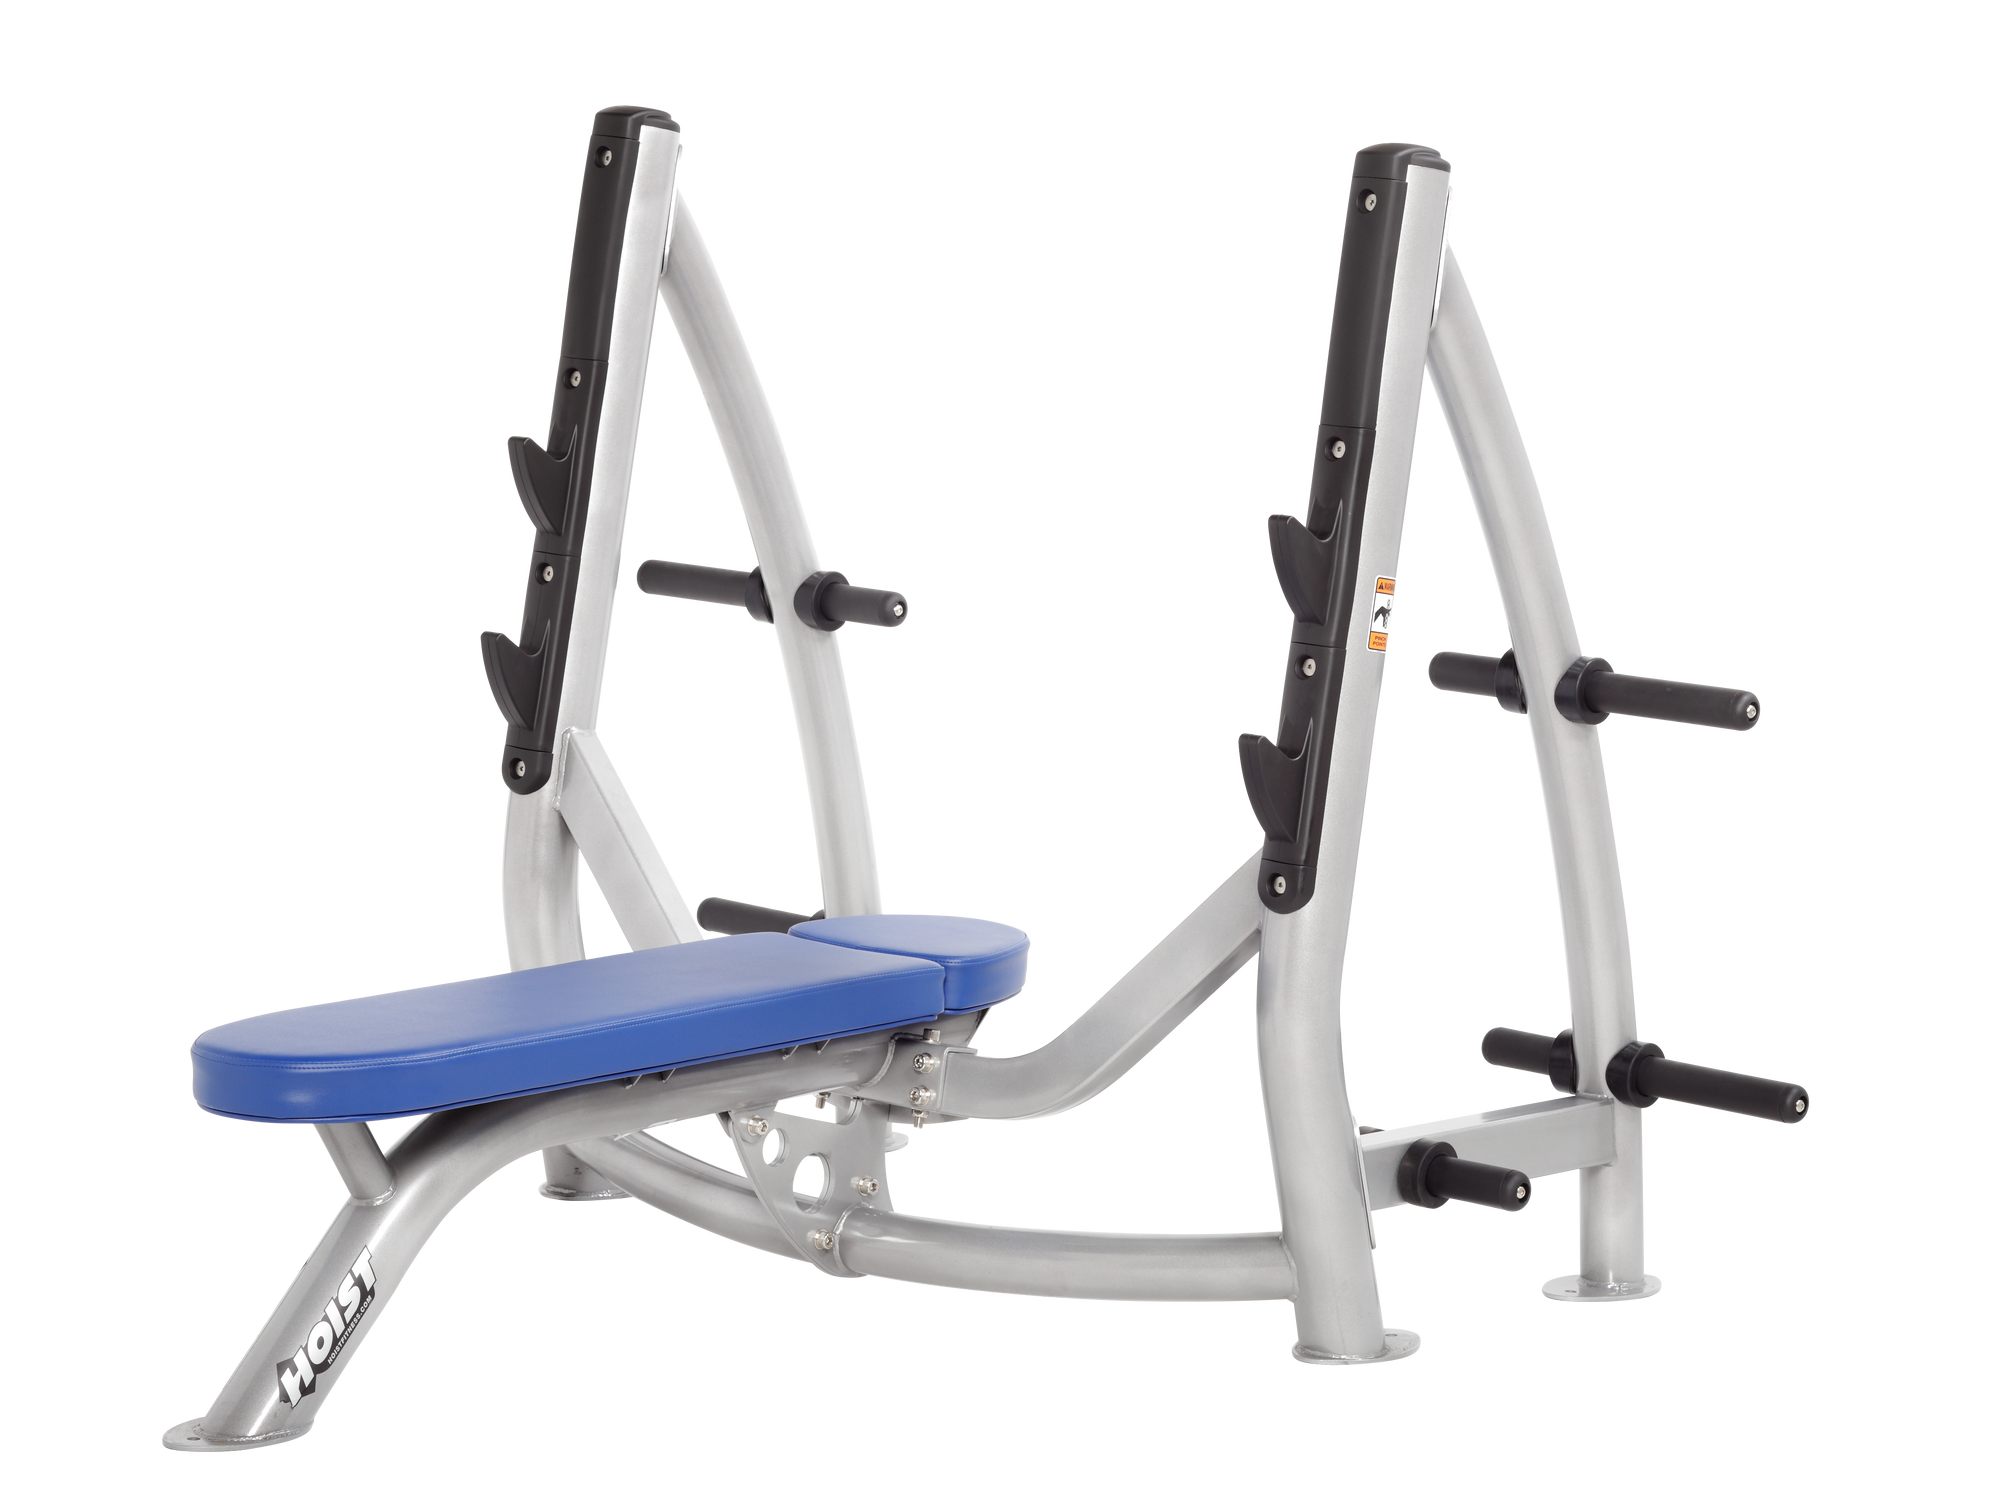 Hoist Fitness CF-3170-A Olympic Flat Bench with Storage full view | Fitness Experience